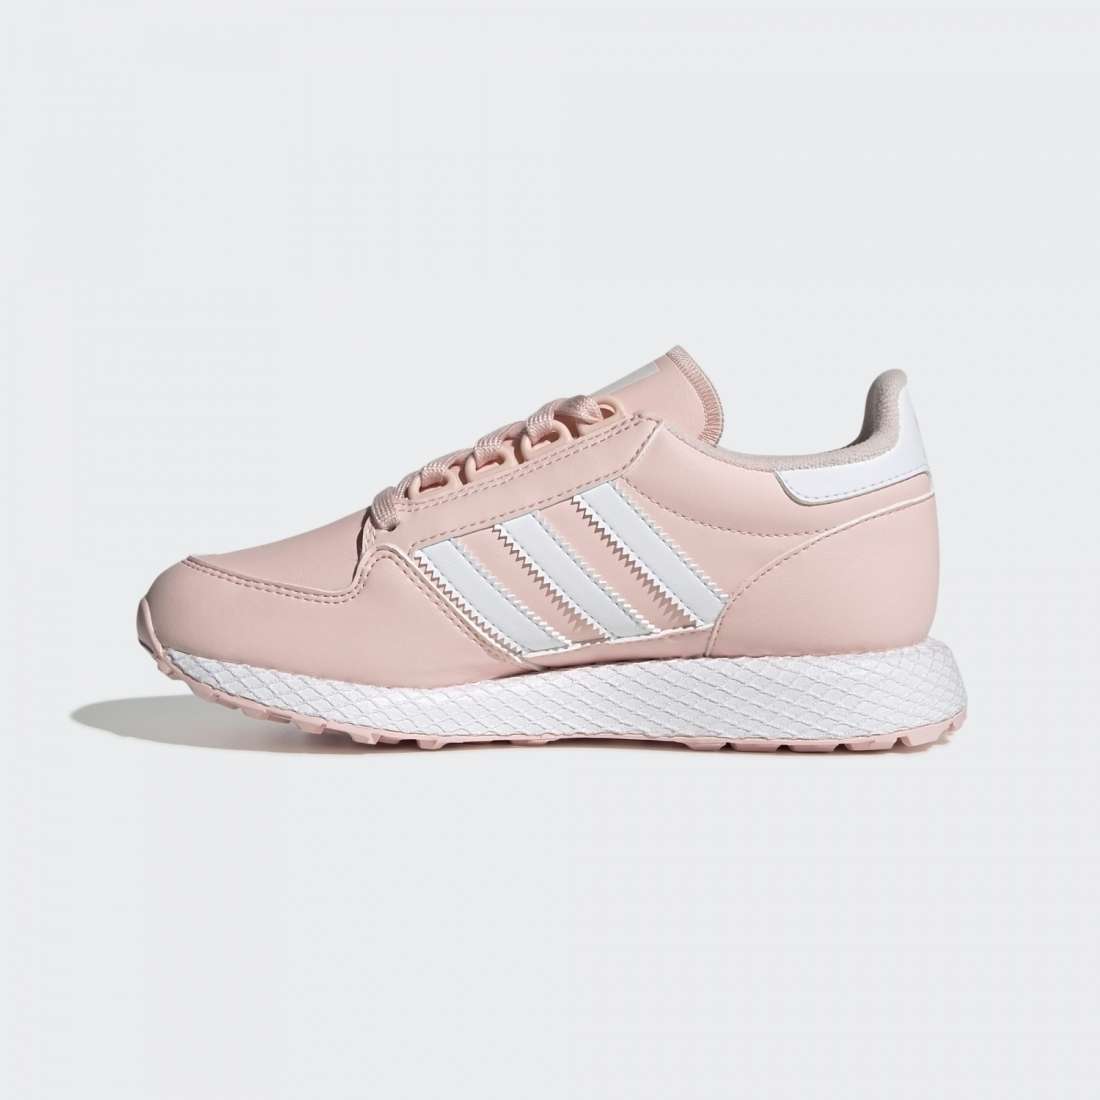 ADIDAS FOREST GROVE J ROSE/WHITE